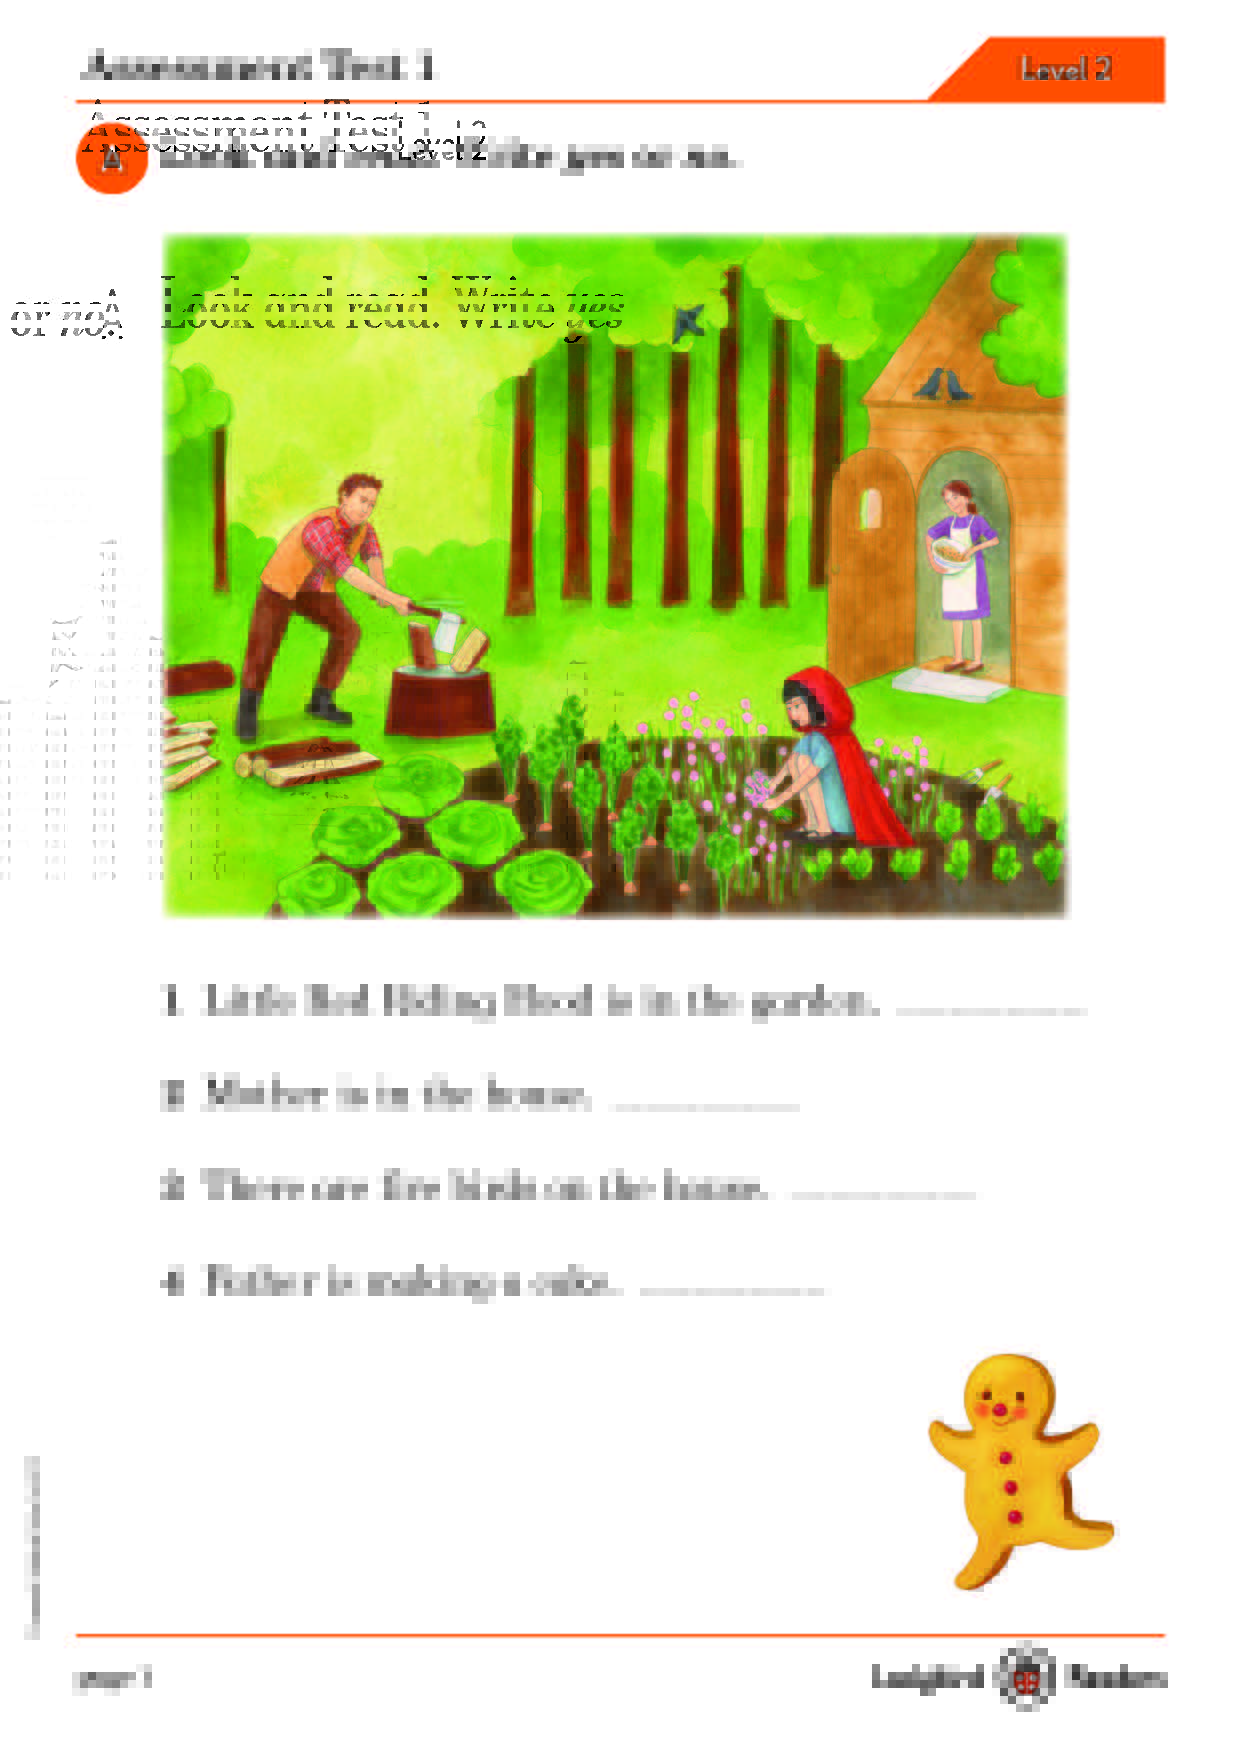 Ladybird Readers Level 2 Assessment Tests and Answer Keys